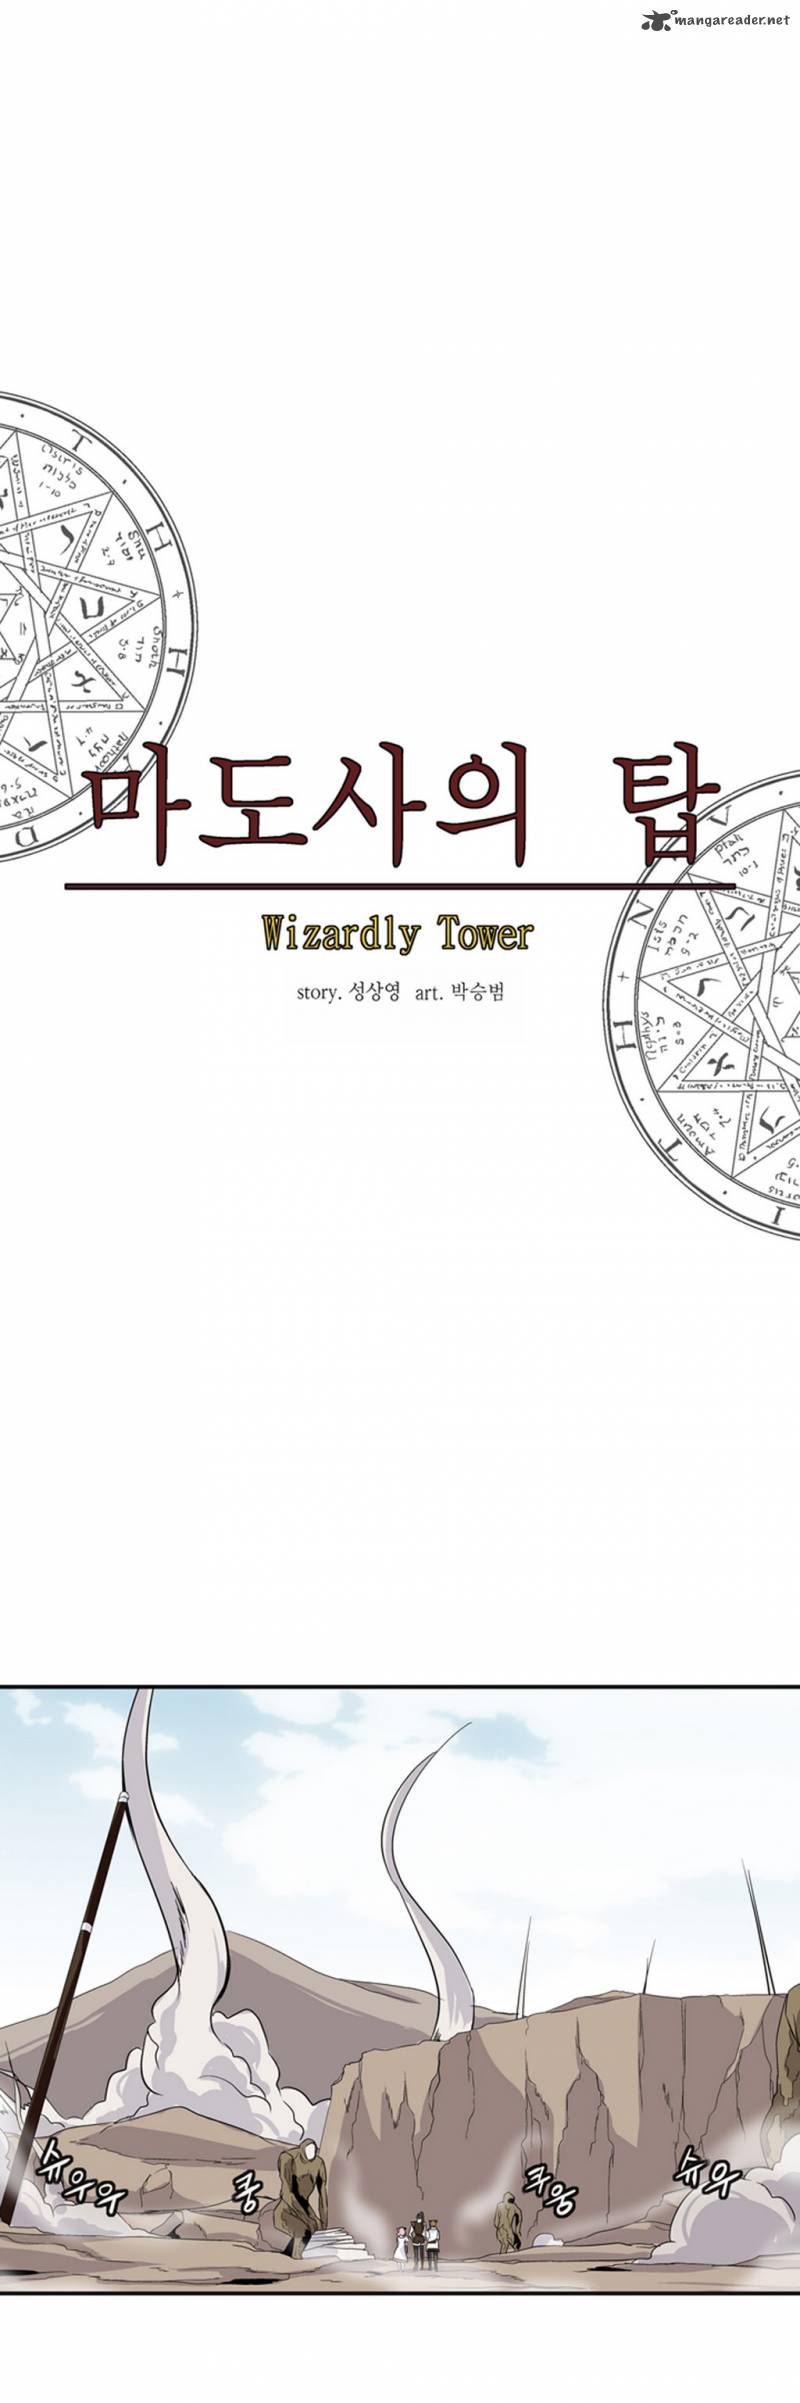 wizardly_tower_12_15